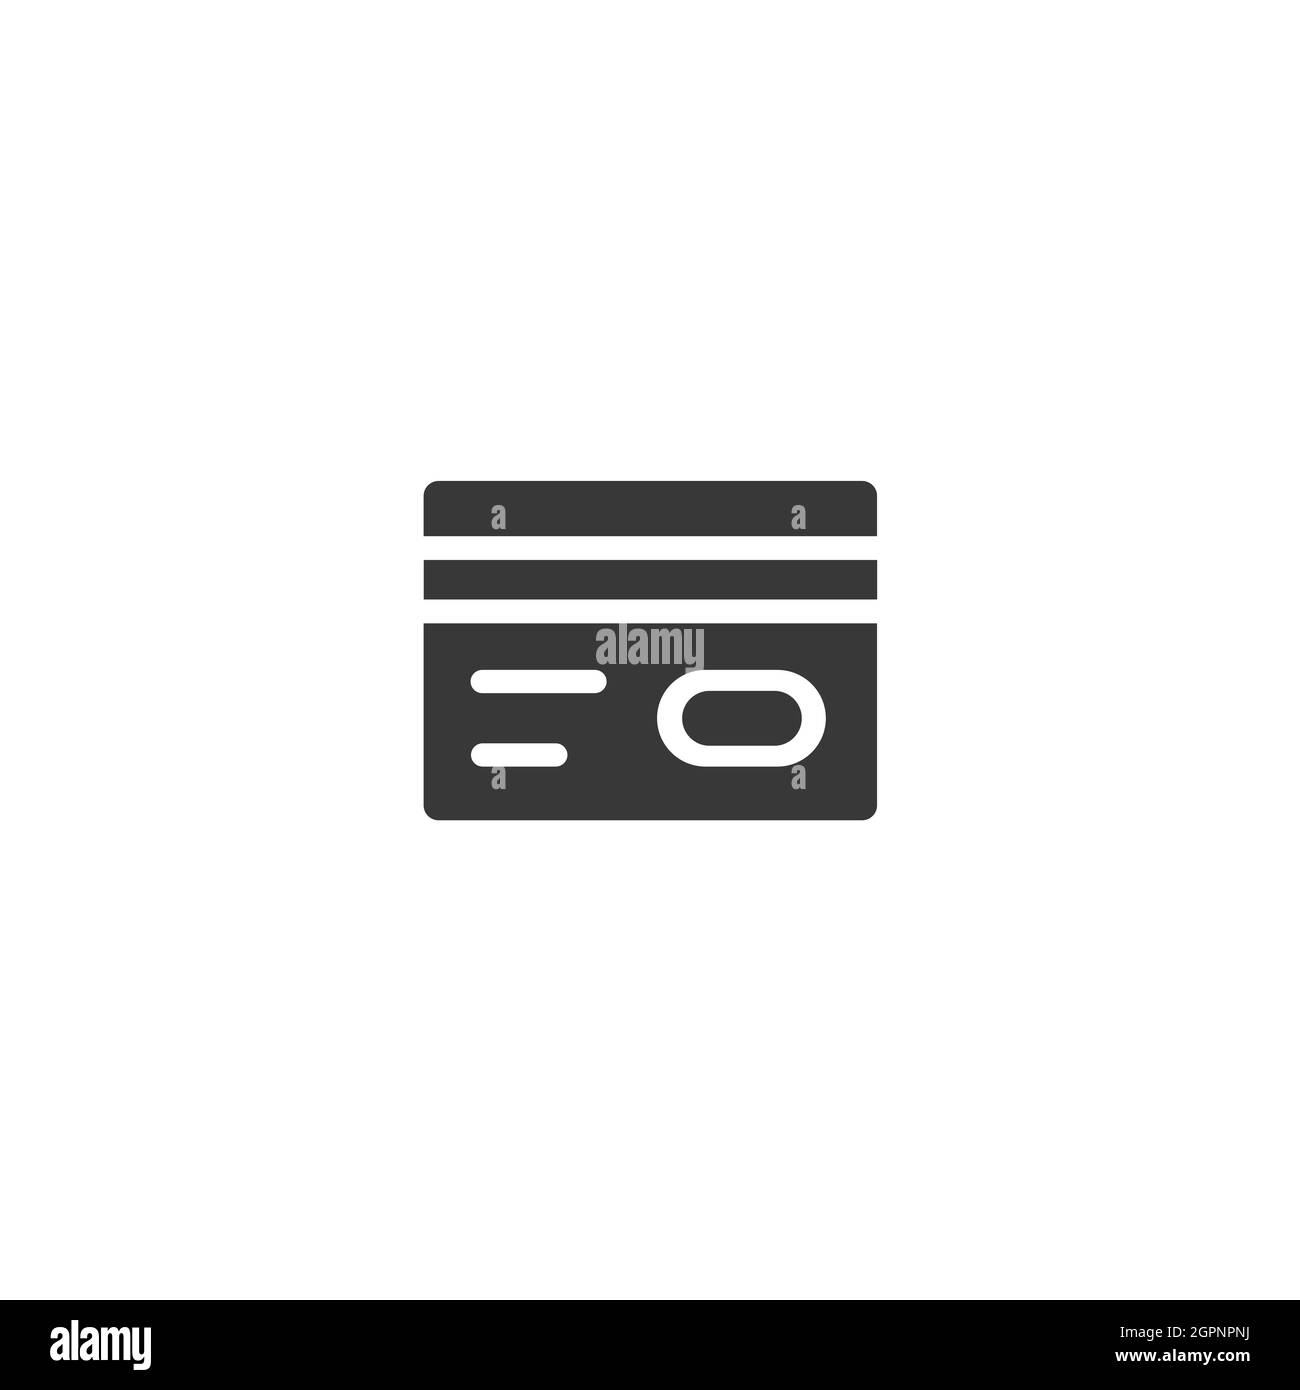 Credit card. Payment options. Isolated icon. Commerce glyph vector illustration Stock Vector